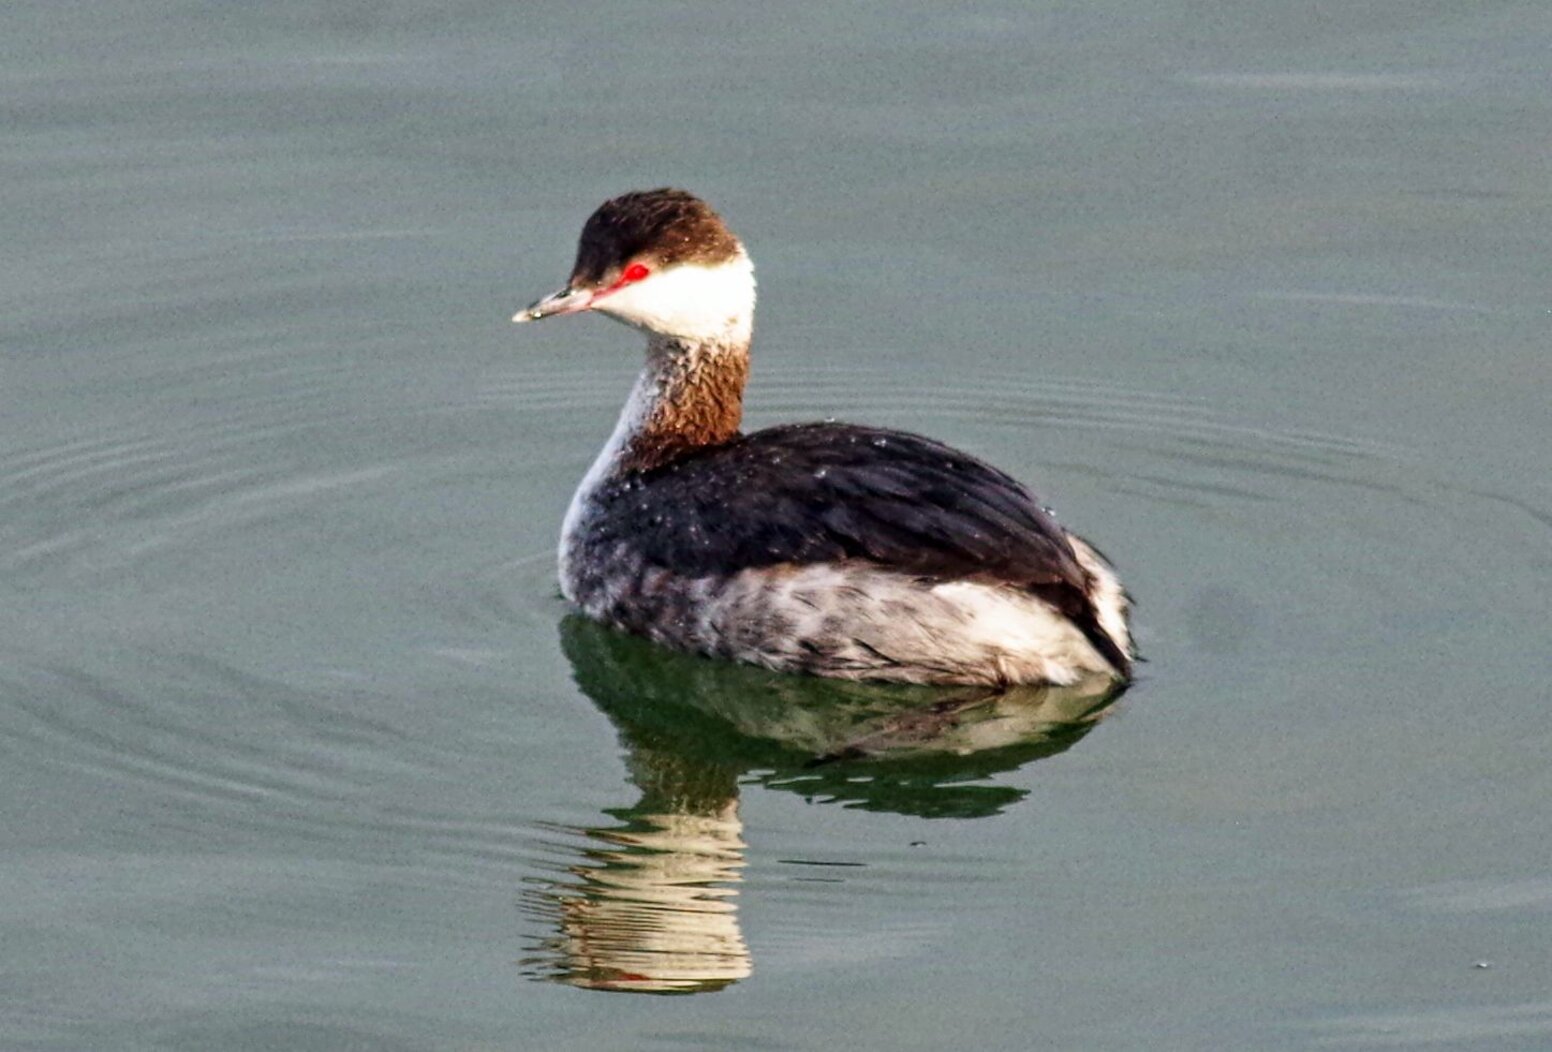 Horned Grebes may be seen from Calvert Vaux Park in the wintertime (and in the right light, their red eyes are a bit otherworldly). Photo: Will Pollard/CC BY-ND 2.0